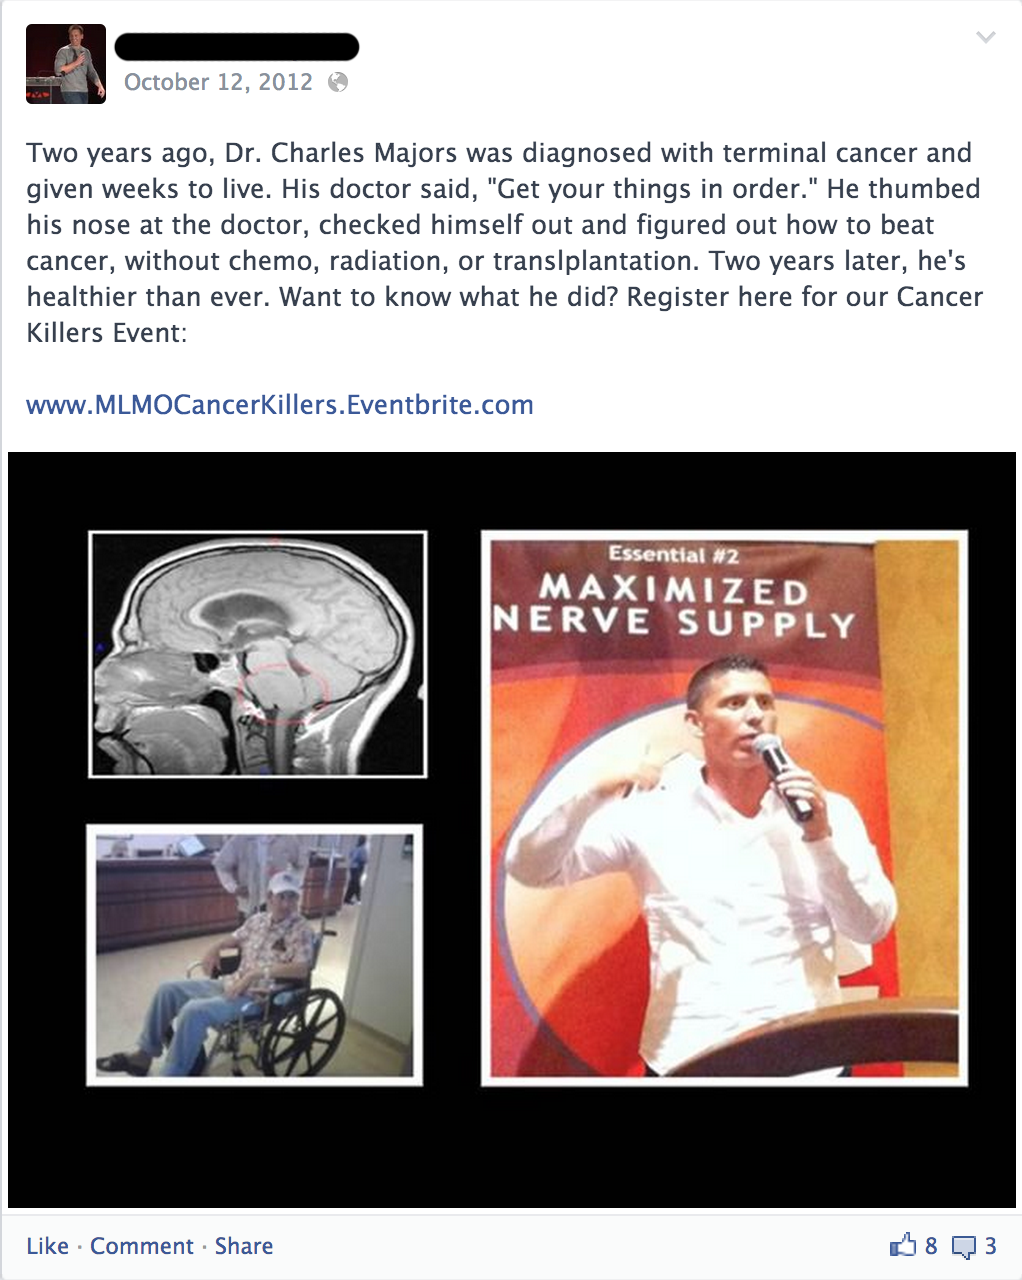 media - Two years ago, Dr. Charles Majors was diagnosed with terminal cancer and given weeks to live. His doctor said, "Get your things in order." He thumbed his nose at the doctor, checked himself out and figured out how to beat cancer, without chemo, ra